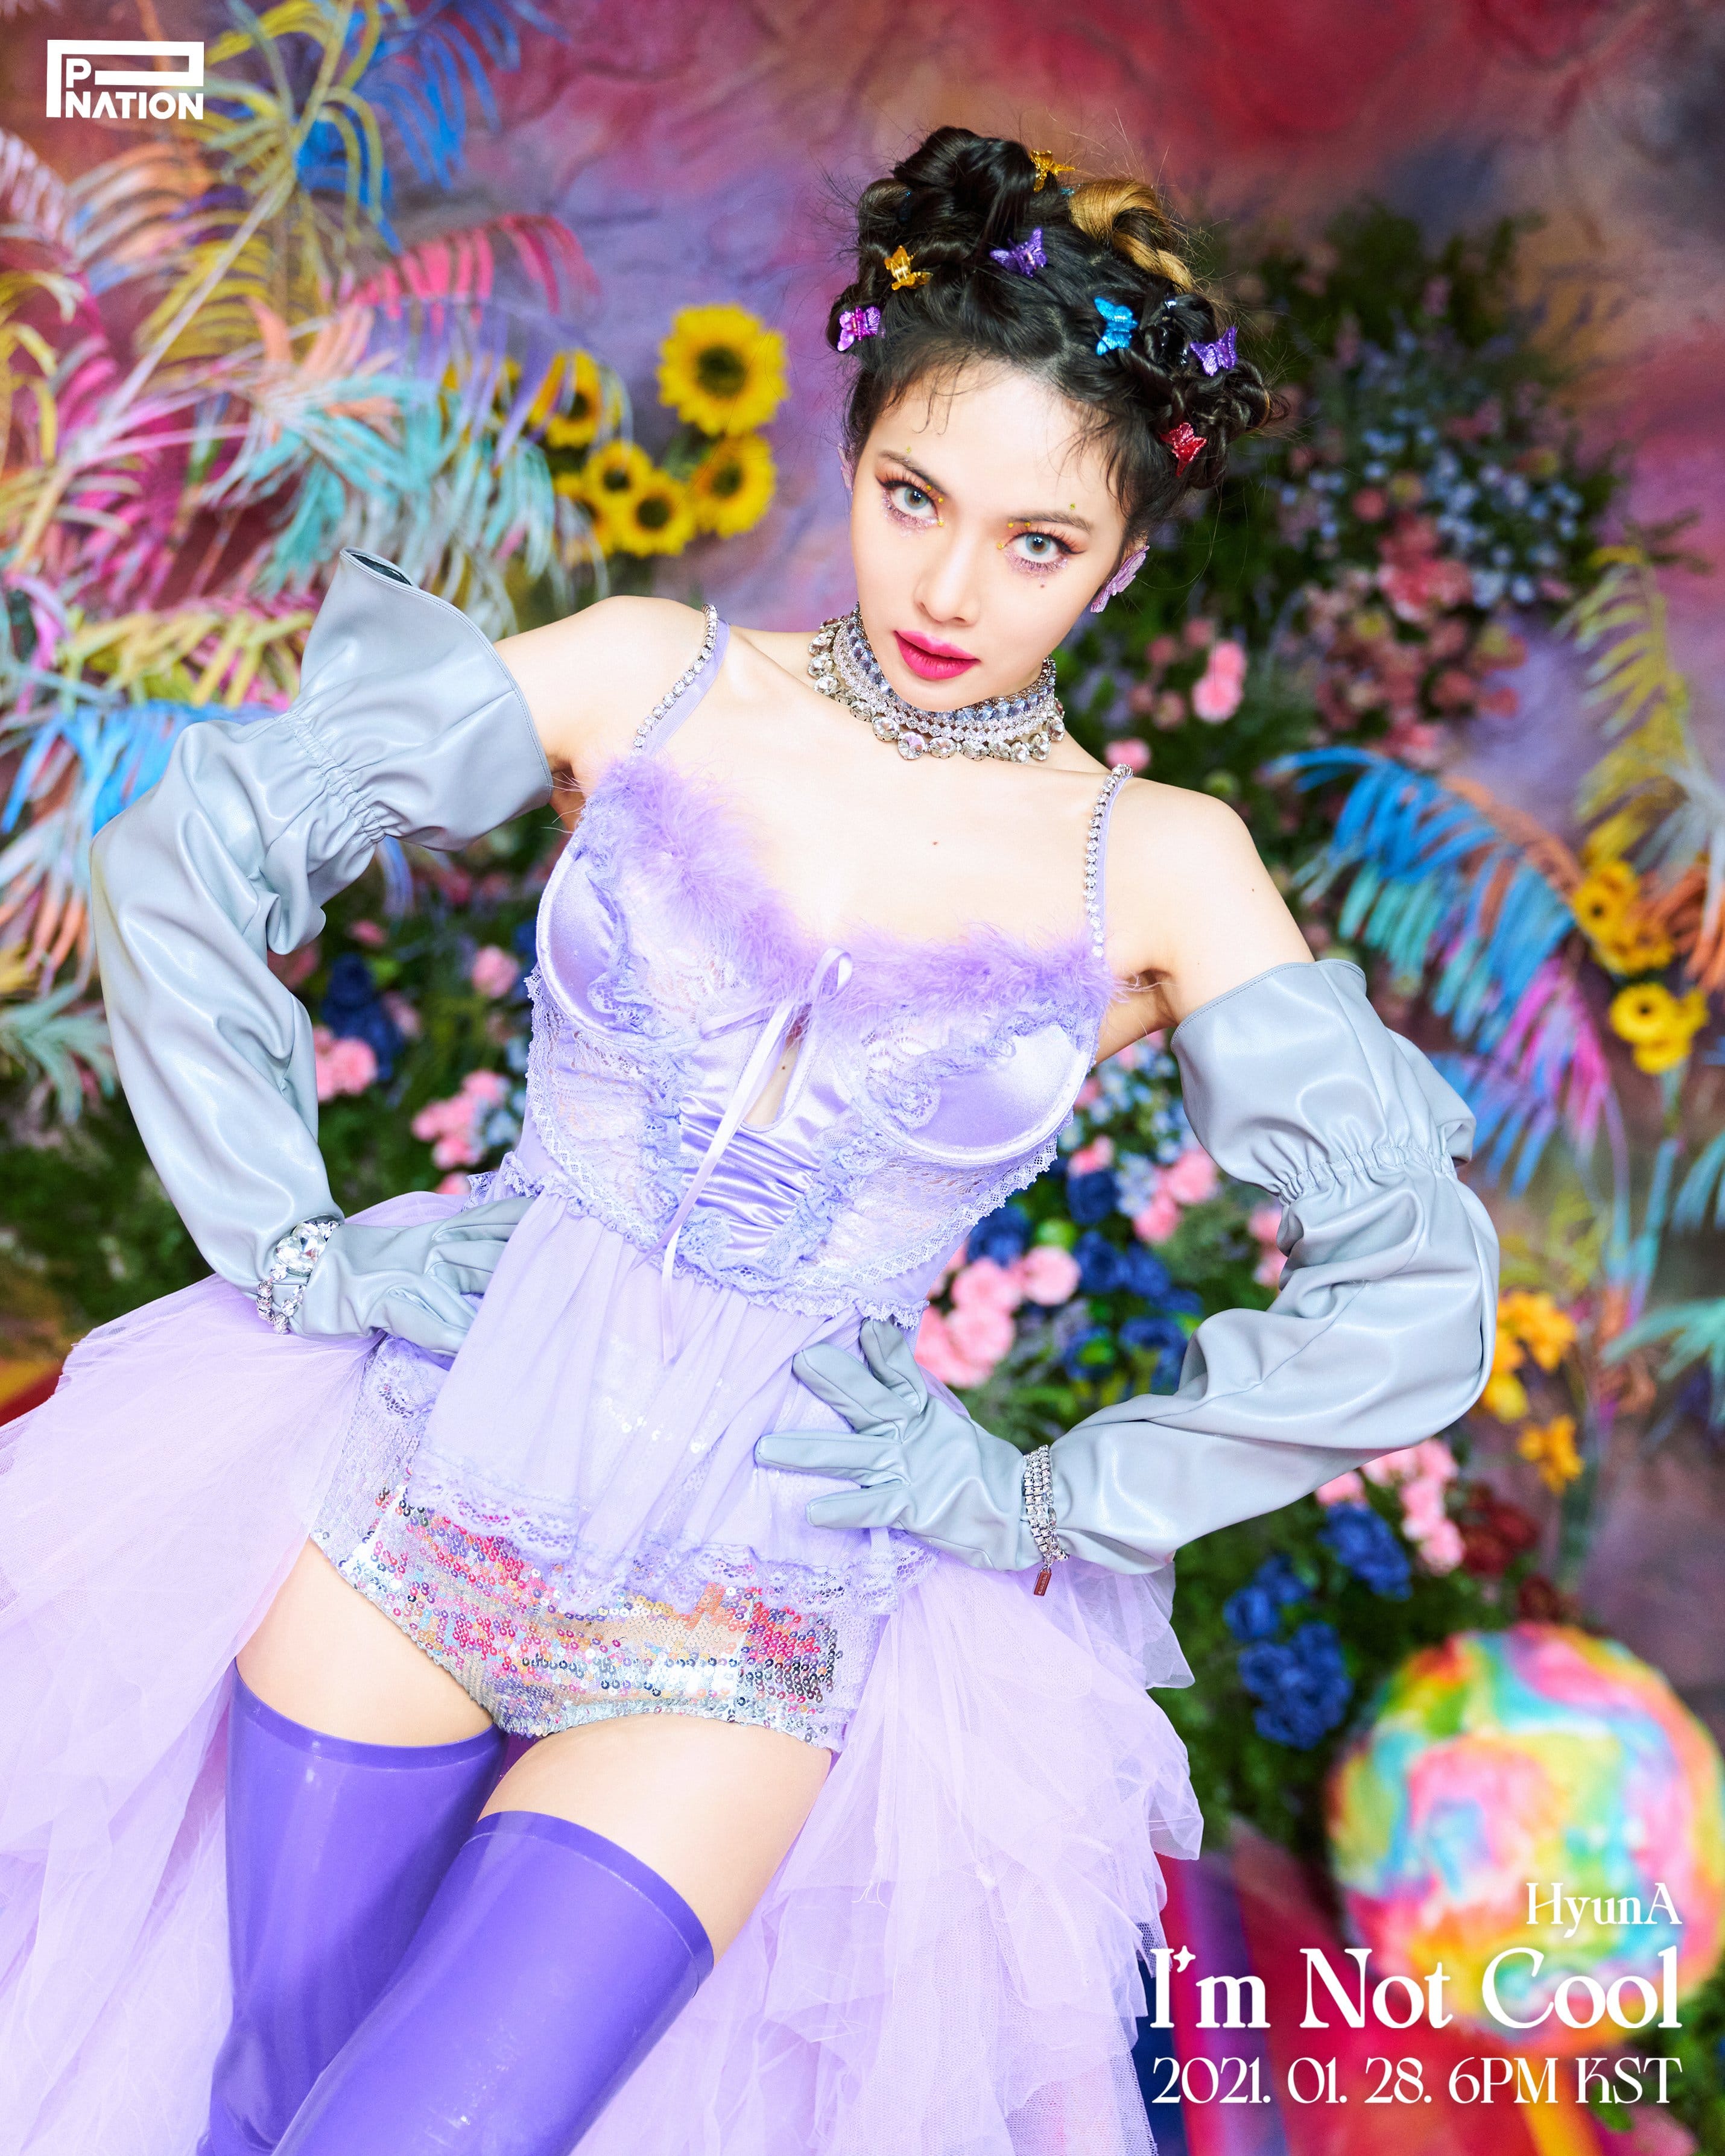 Watch: HyunA Says “I'm Not Cool” In Colorful Comeback MV